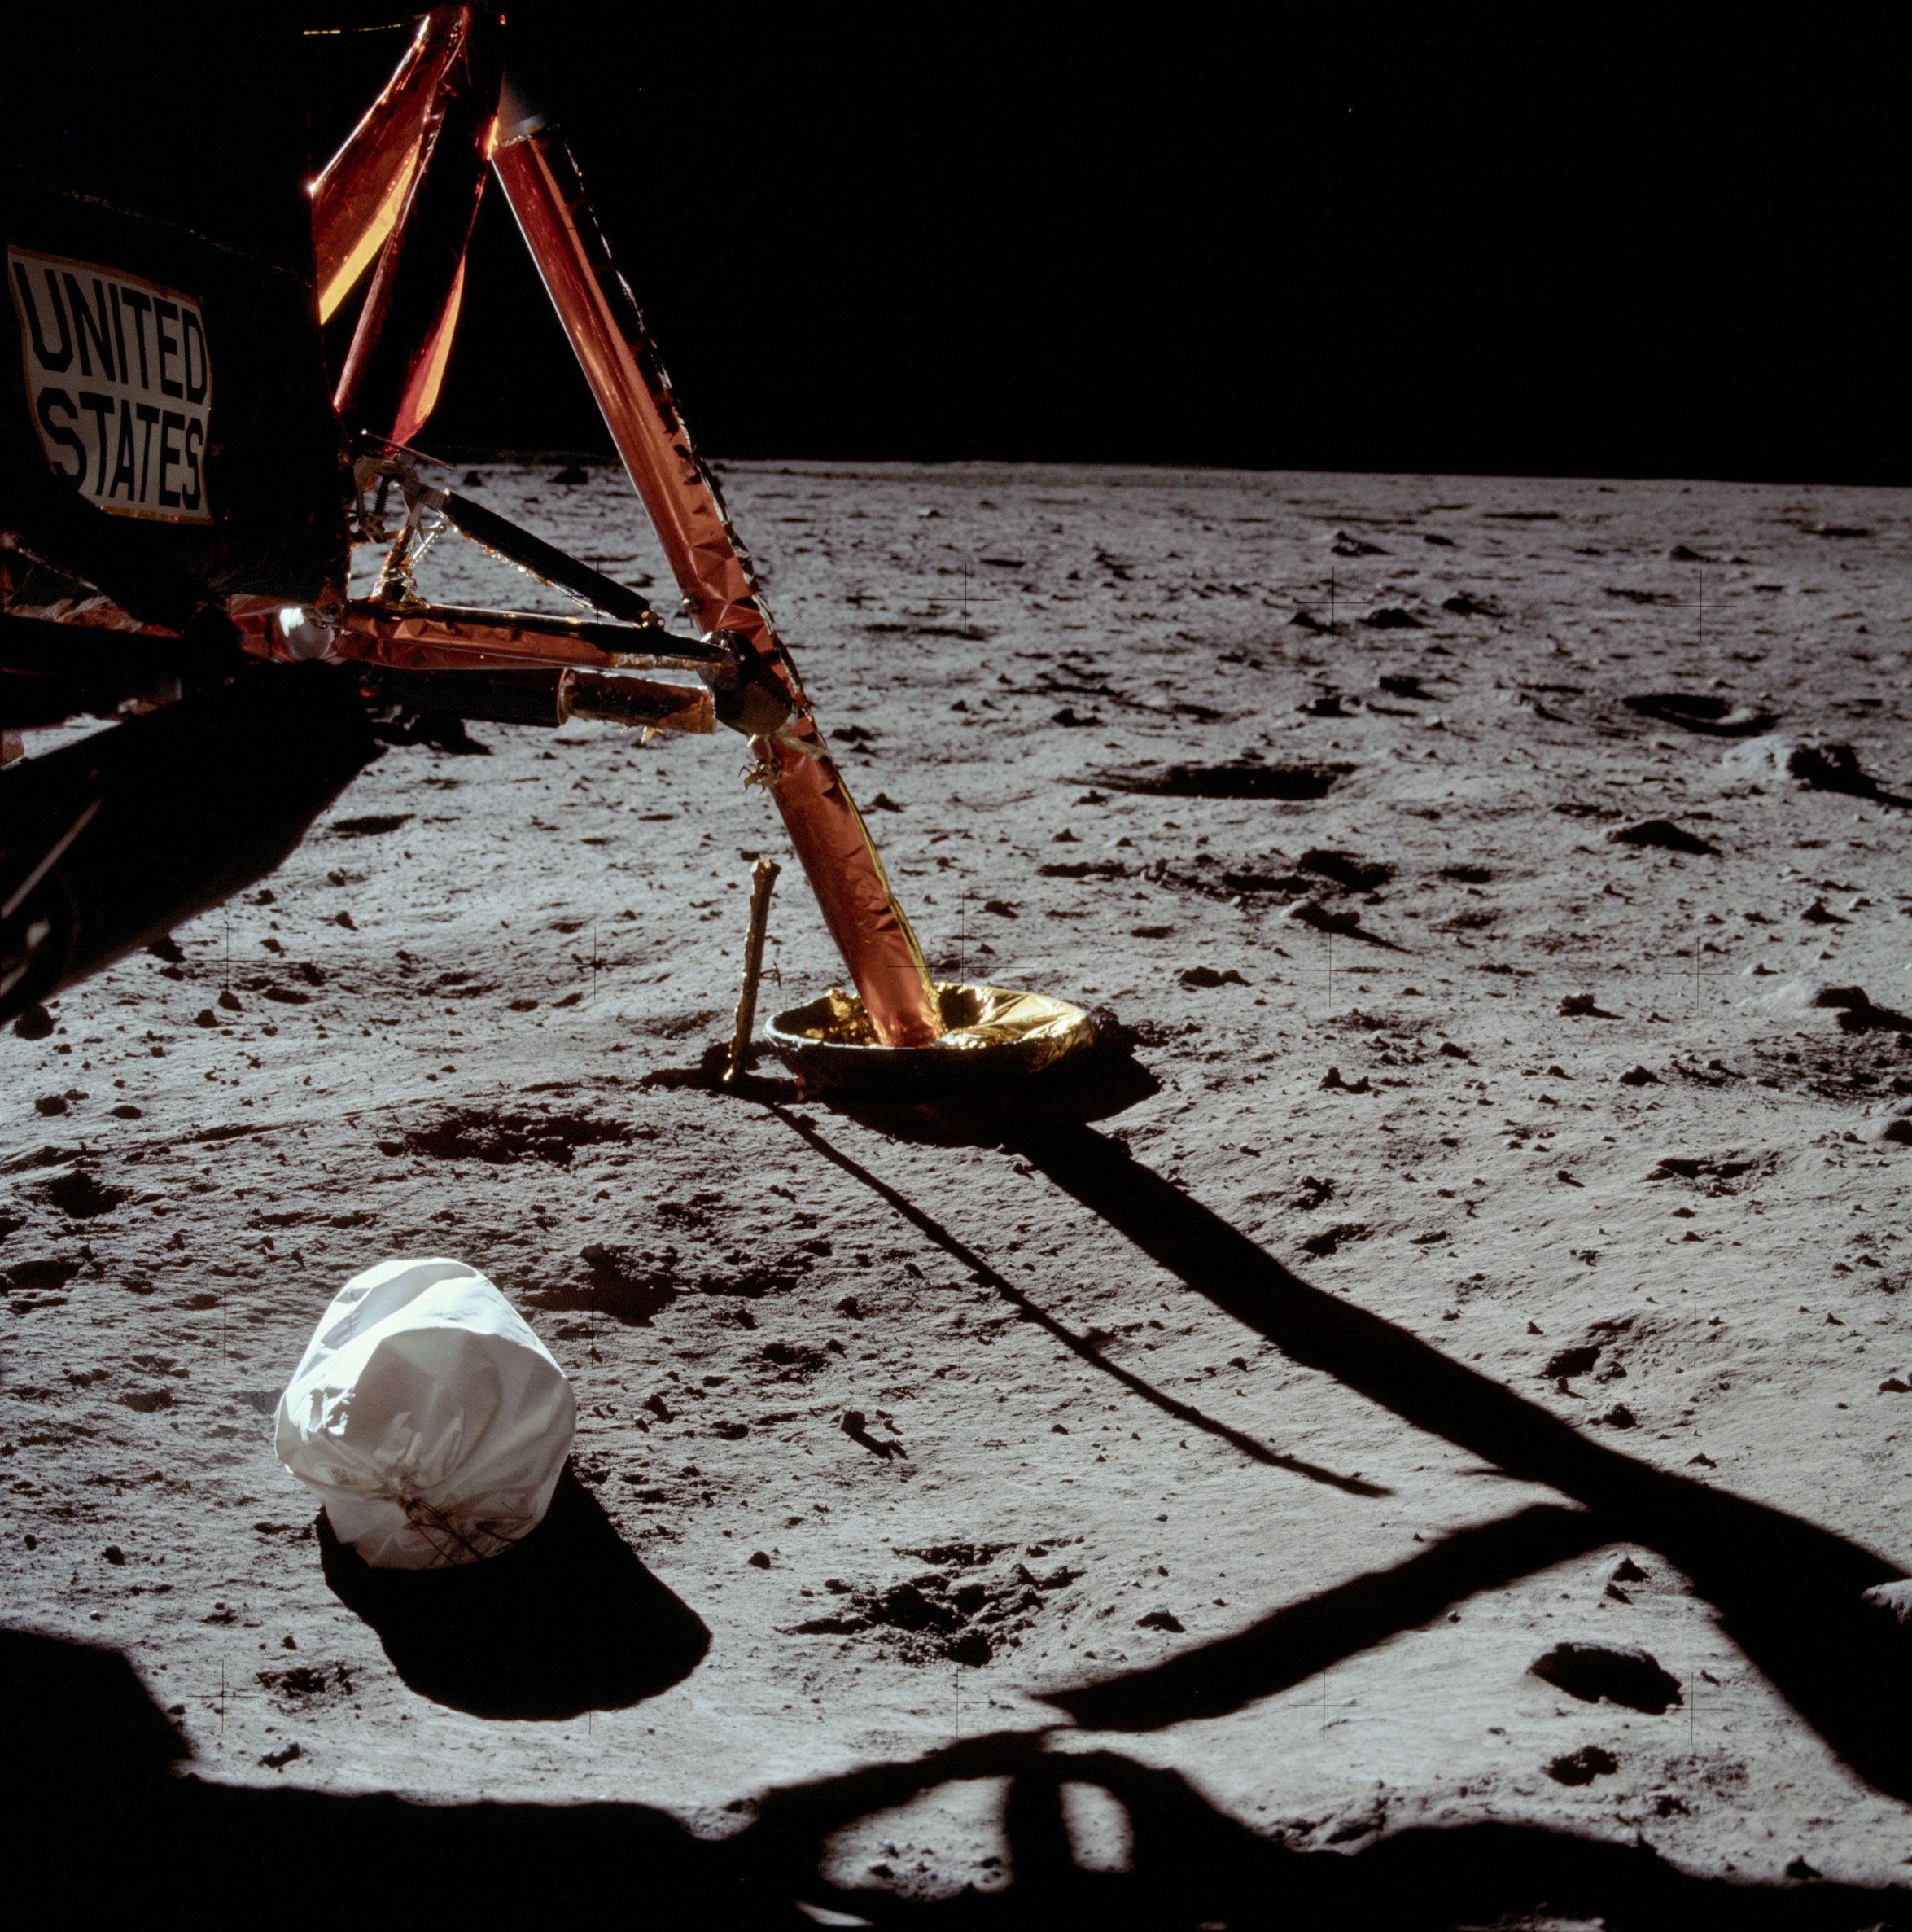 25 Rare and Overlooked Images From the Famed Apollo 11 Mission